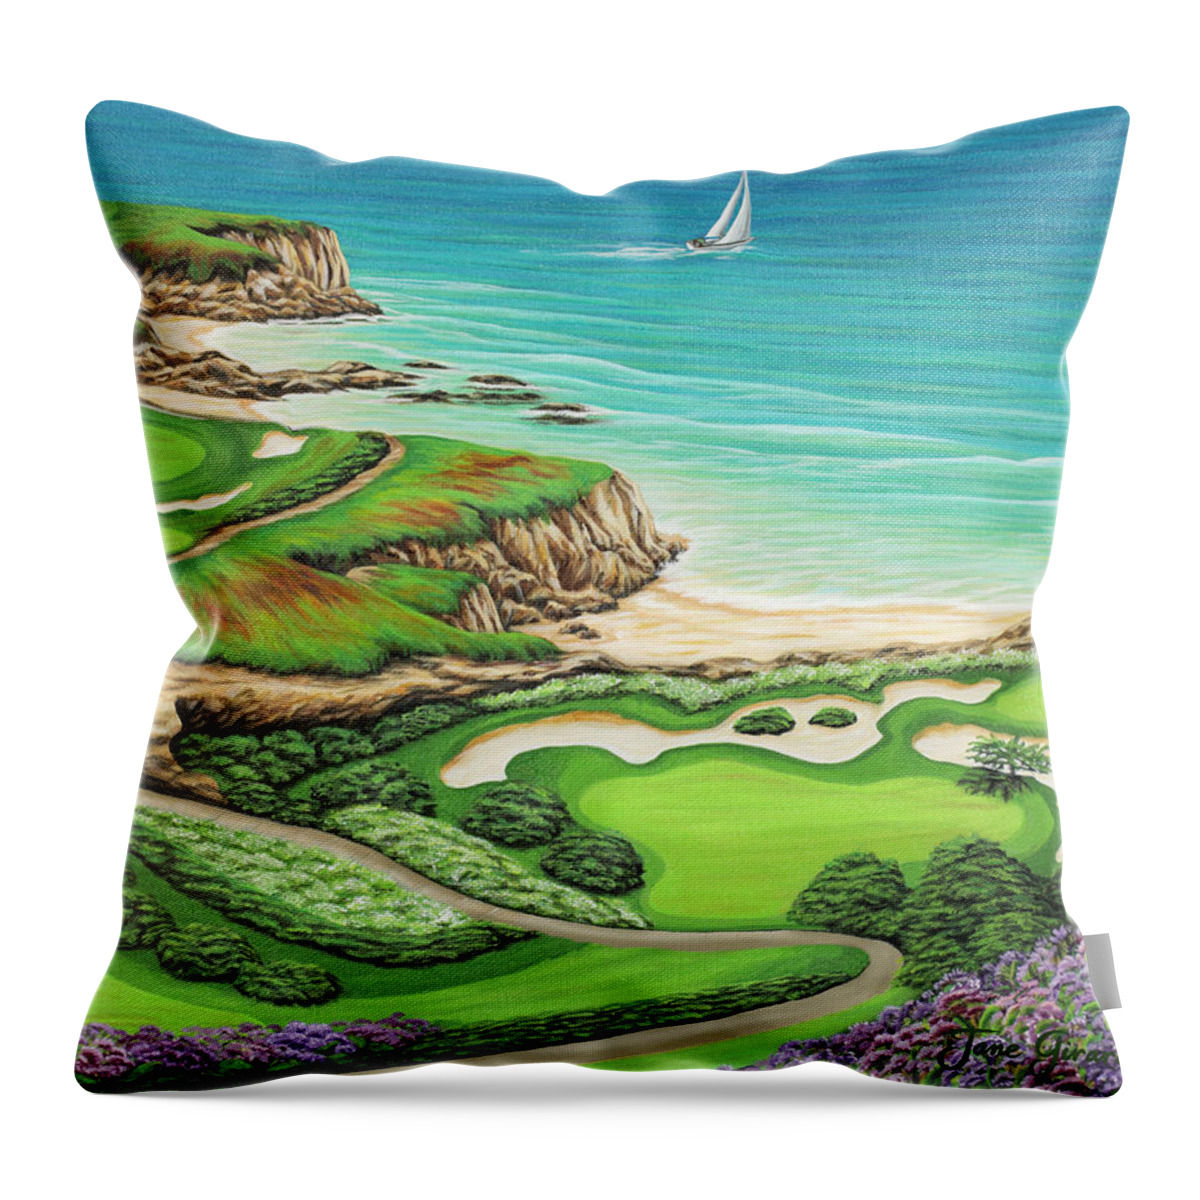 Ocean Throw Pillow featuring the painting Newport Coast by Jane Girardot